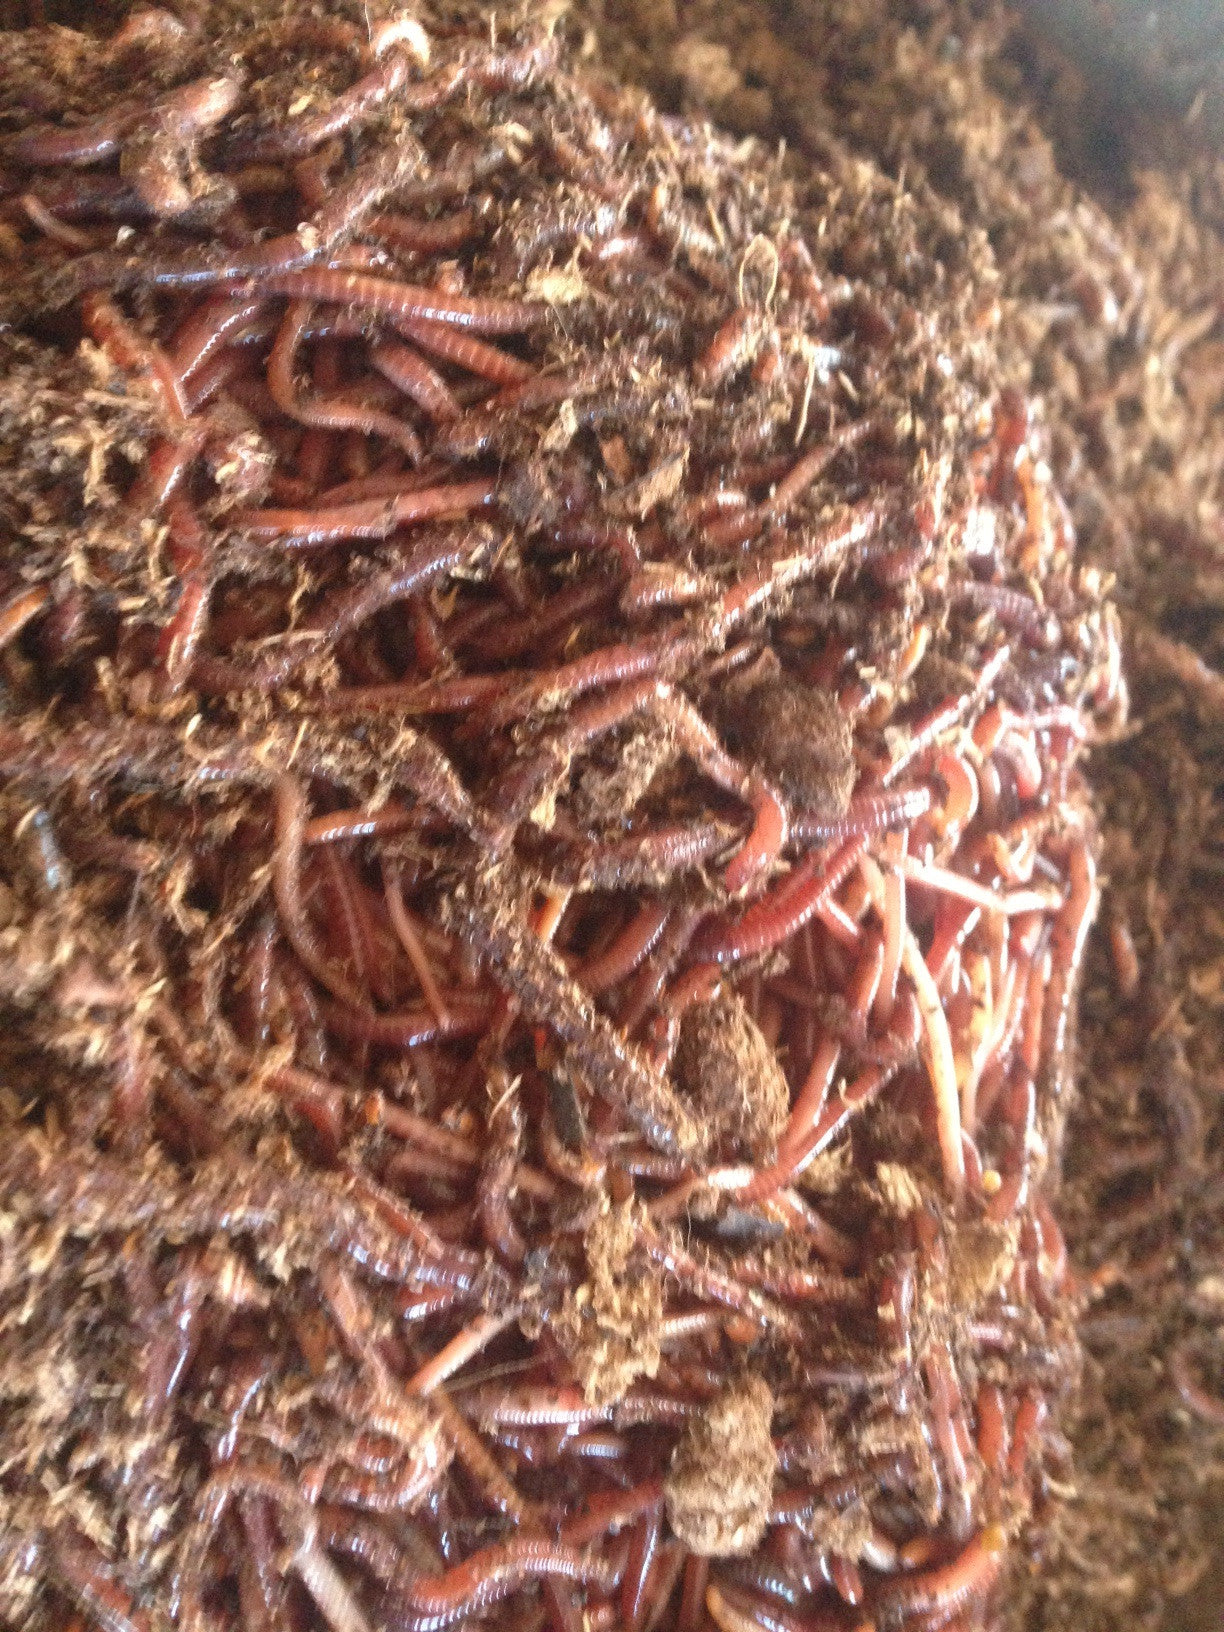 Red Wiggler Worms For Sale